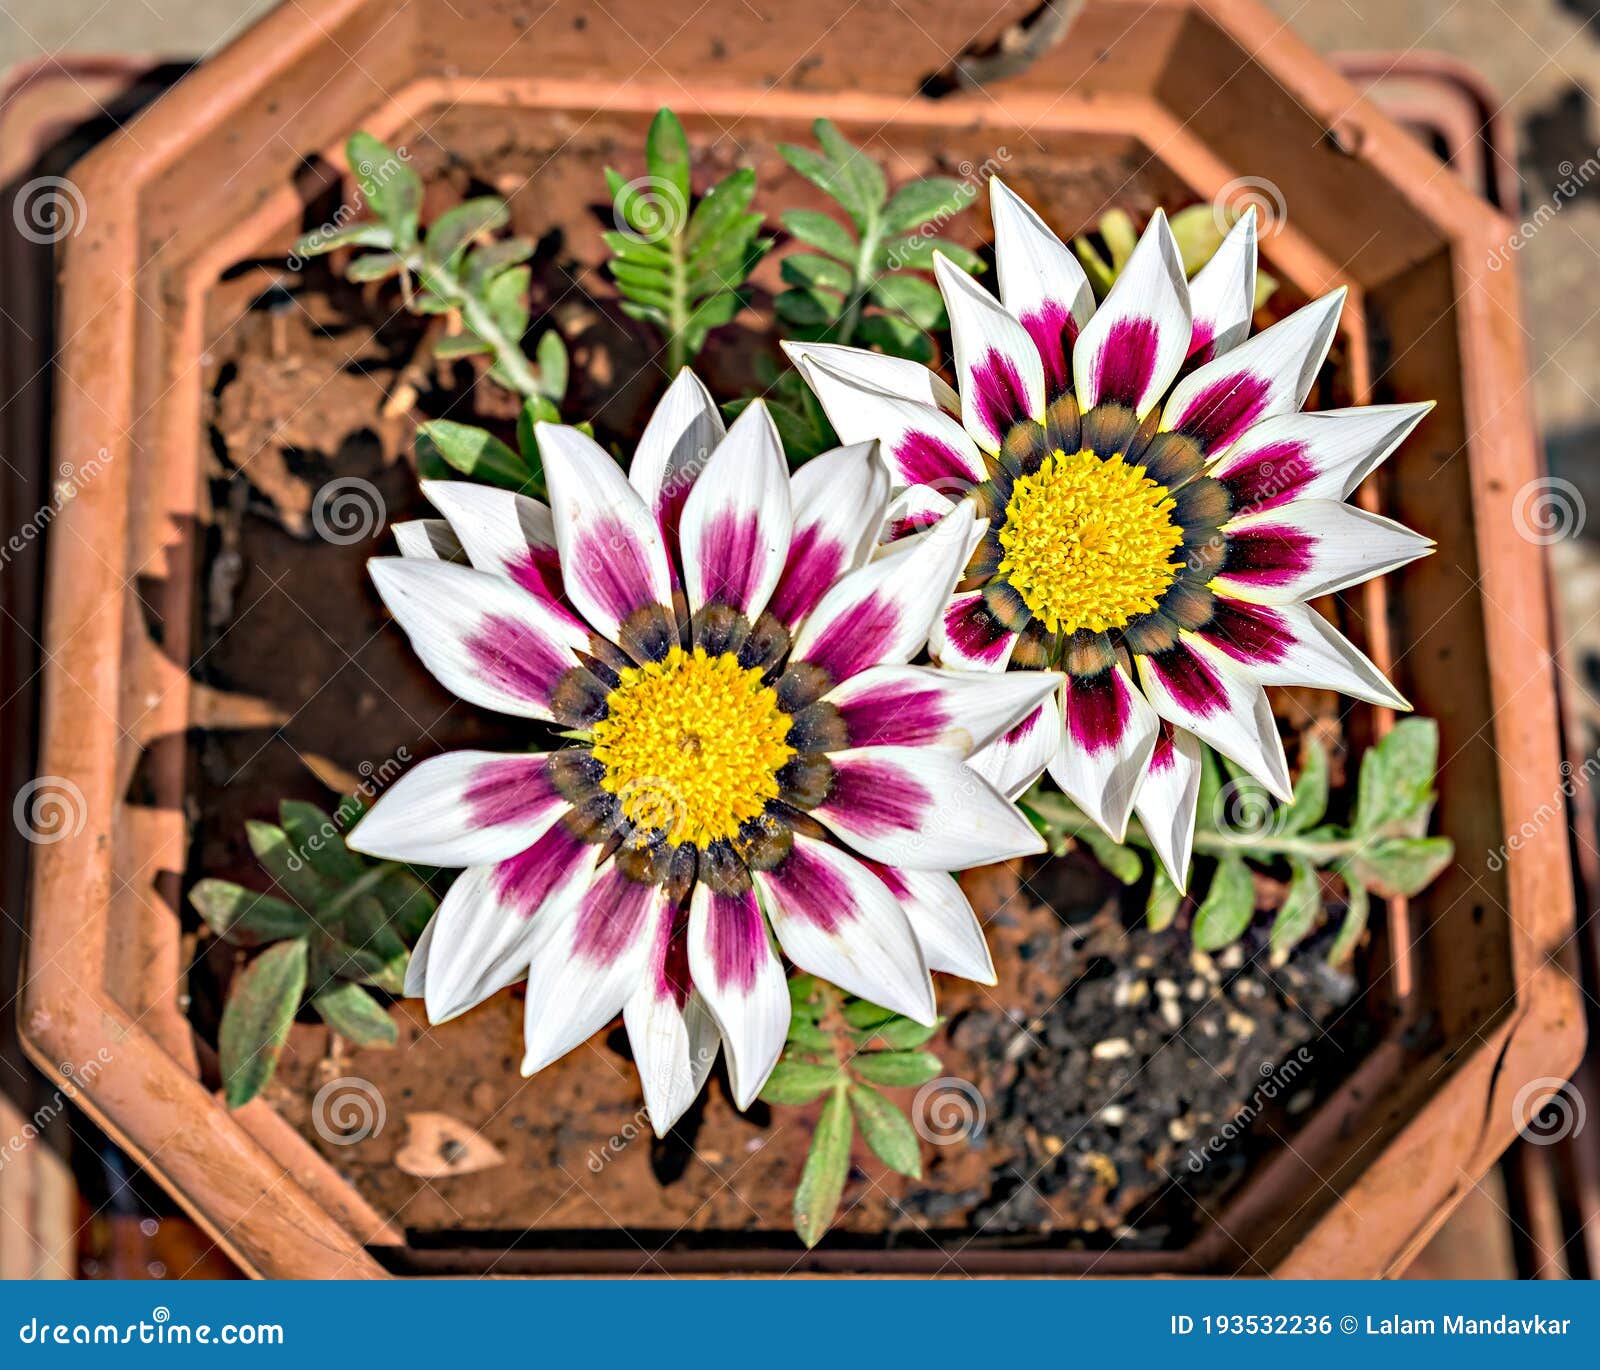 , close-up image of two white and pink gazania flower in a squarish pot with yellow center